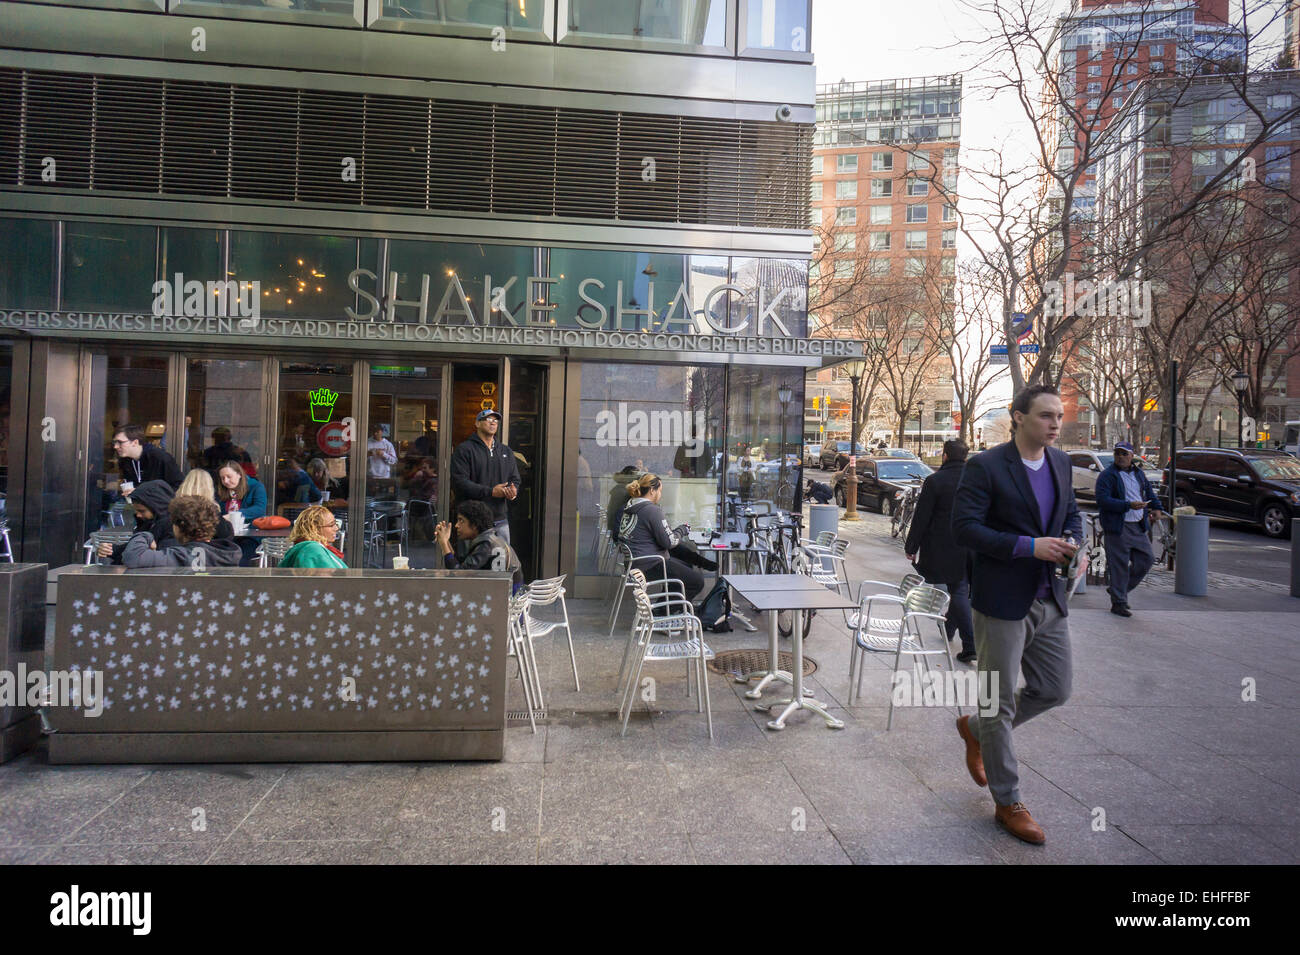 Burgers lovers lunch at the Shake Shack in the Tribeca neighborhood of New York on Wednesday, March 11, 2015.  Shack Shake reported revenue growth of 51 percent in its first quarter since its IPO. The burger joint has 63 stores and plans to open 10 more a year possibly reaching 450 stores. (© Richard B. Levine) Stock Photo